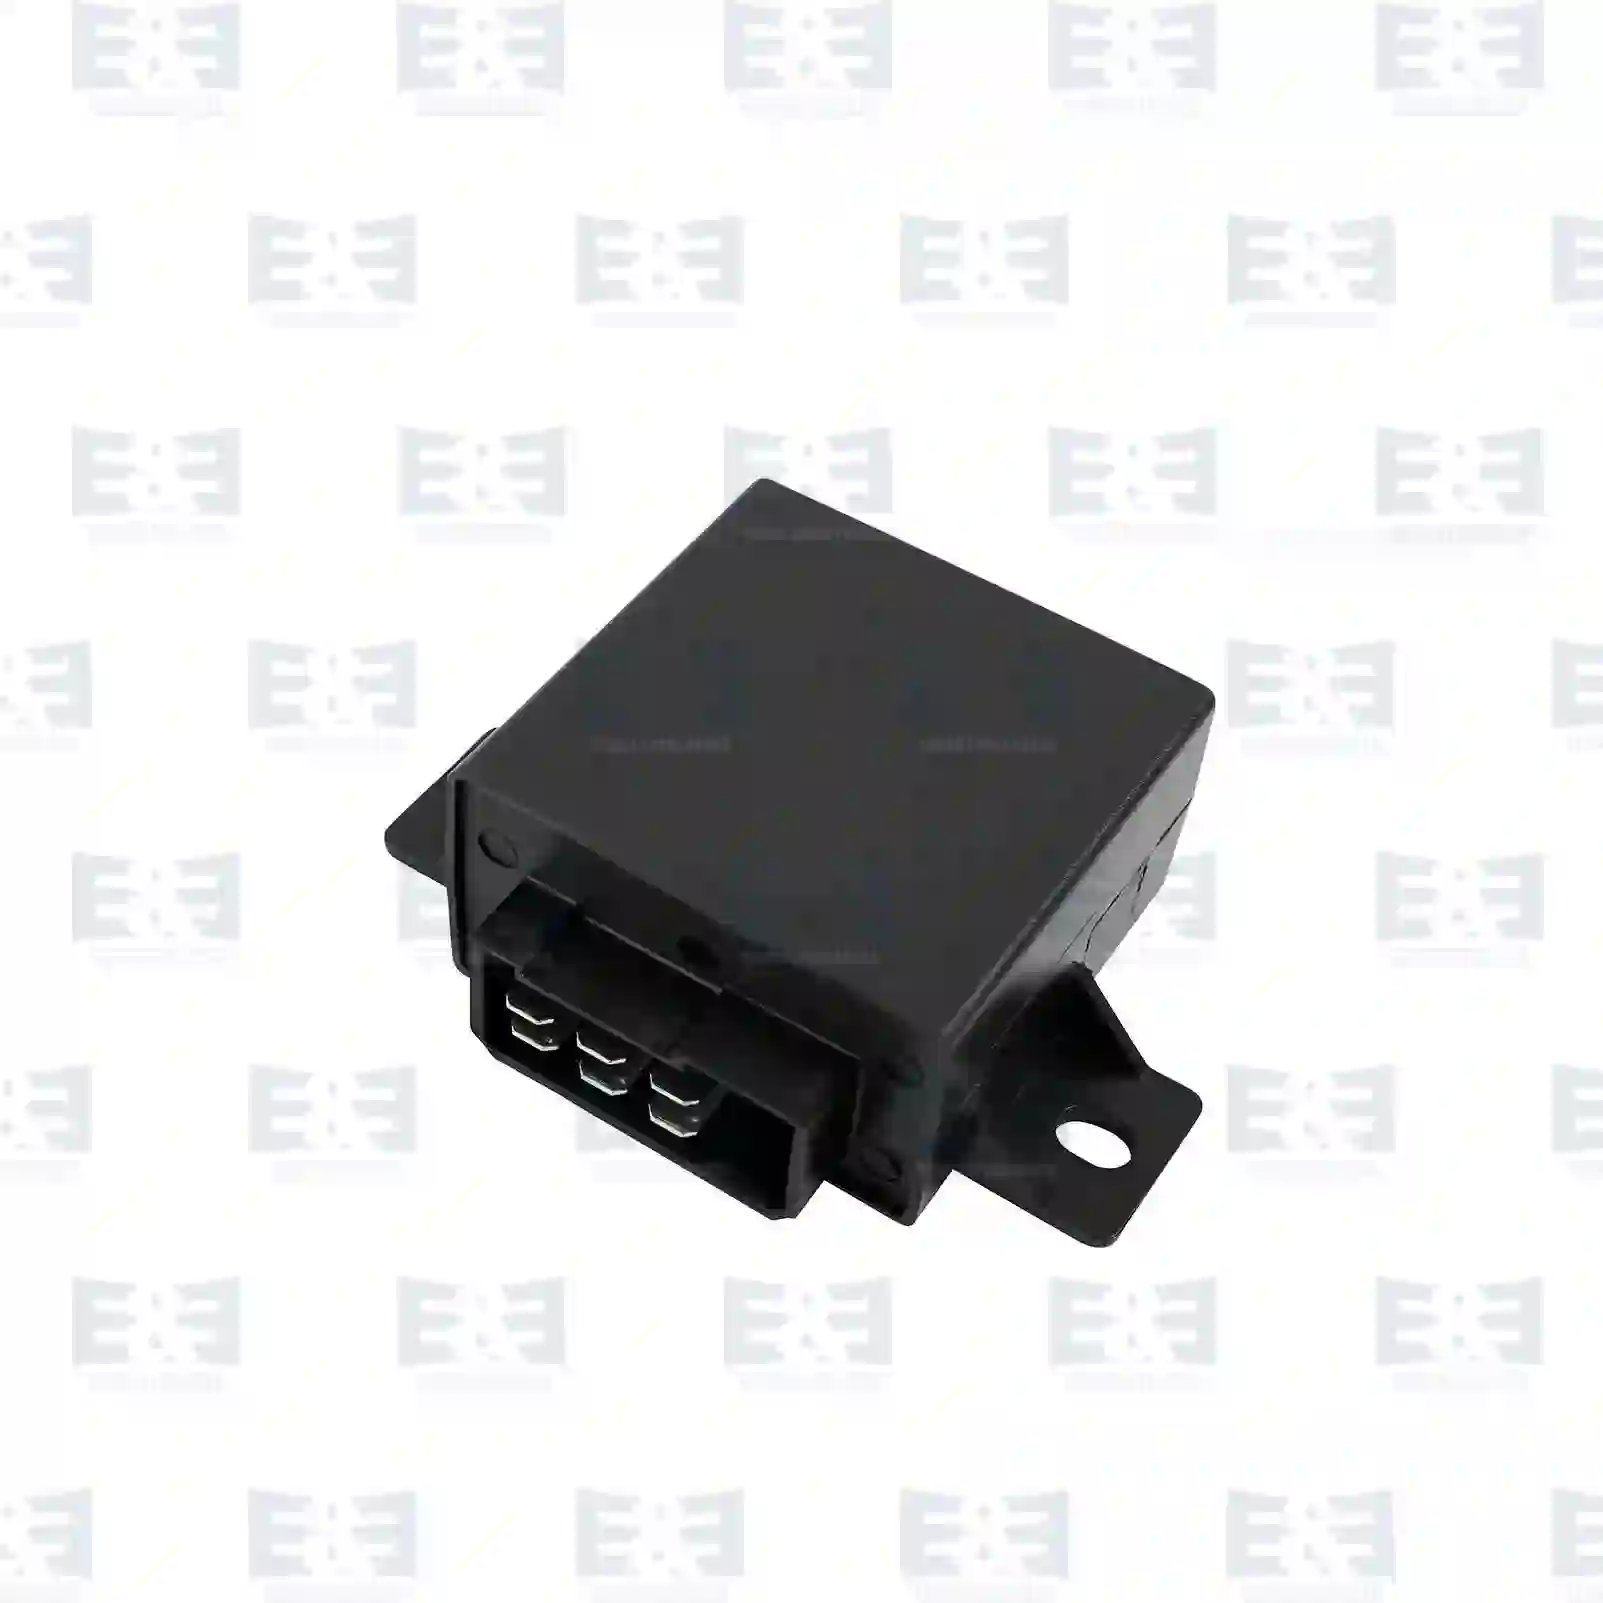 Relay Turn signal relay, EE No 2E2290590 ,  oem no:0636222, 1519527, 384127, 636222, 1713085, 91146237, 00920690, 5010168944, 86039947, 99436137, 2462335, 105610606, 6060115, 606011508, 81253100033, 81253100034, 81253106038, 0015445732, 0015448832, 0025440532, 0025448032, 0335215134, 7731071000, 088000177, 5000361088, 5010168944, 7415048941, 2440915007, 7371071000, 1863500171, 14212334, 1501686, 15048941, 1573780, 1582410, 1582412, 1587993, 1623180, ZG21260-0008 E&E Truck Spare Parts | Truck Spare Parts, Auotomotive Spare Parts